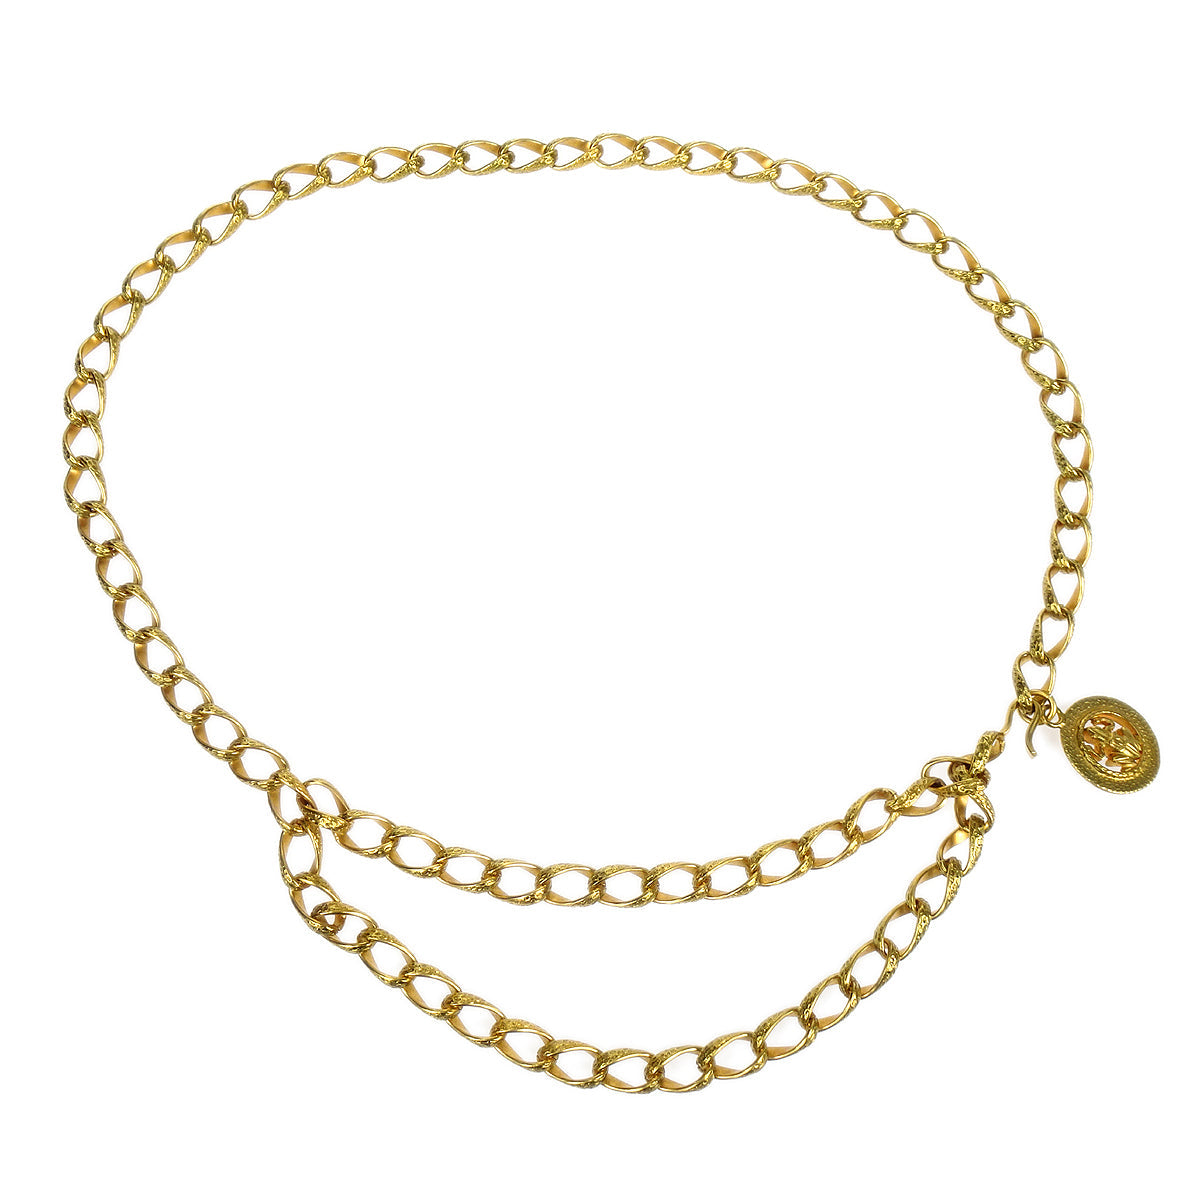 CHANEL Medallion Gold Chain Belt 94A Small Good 27793